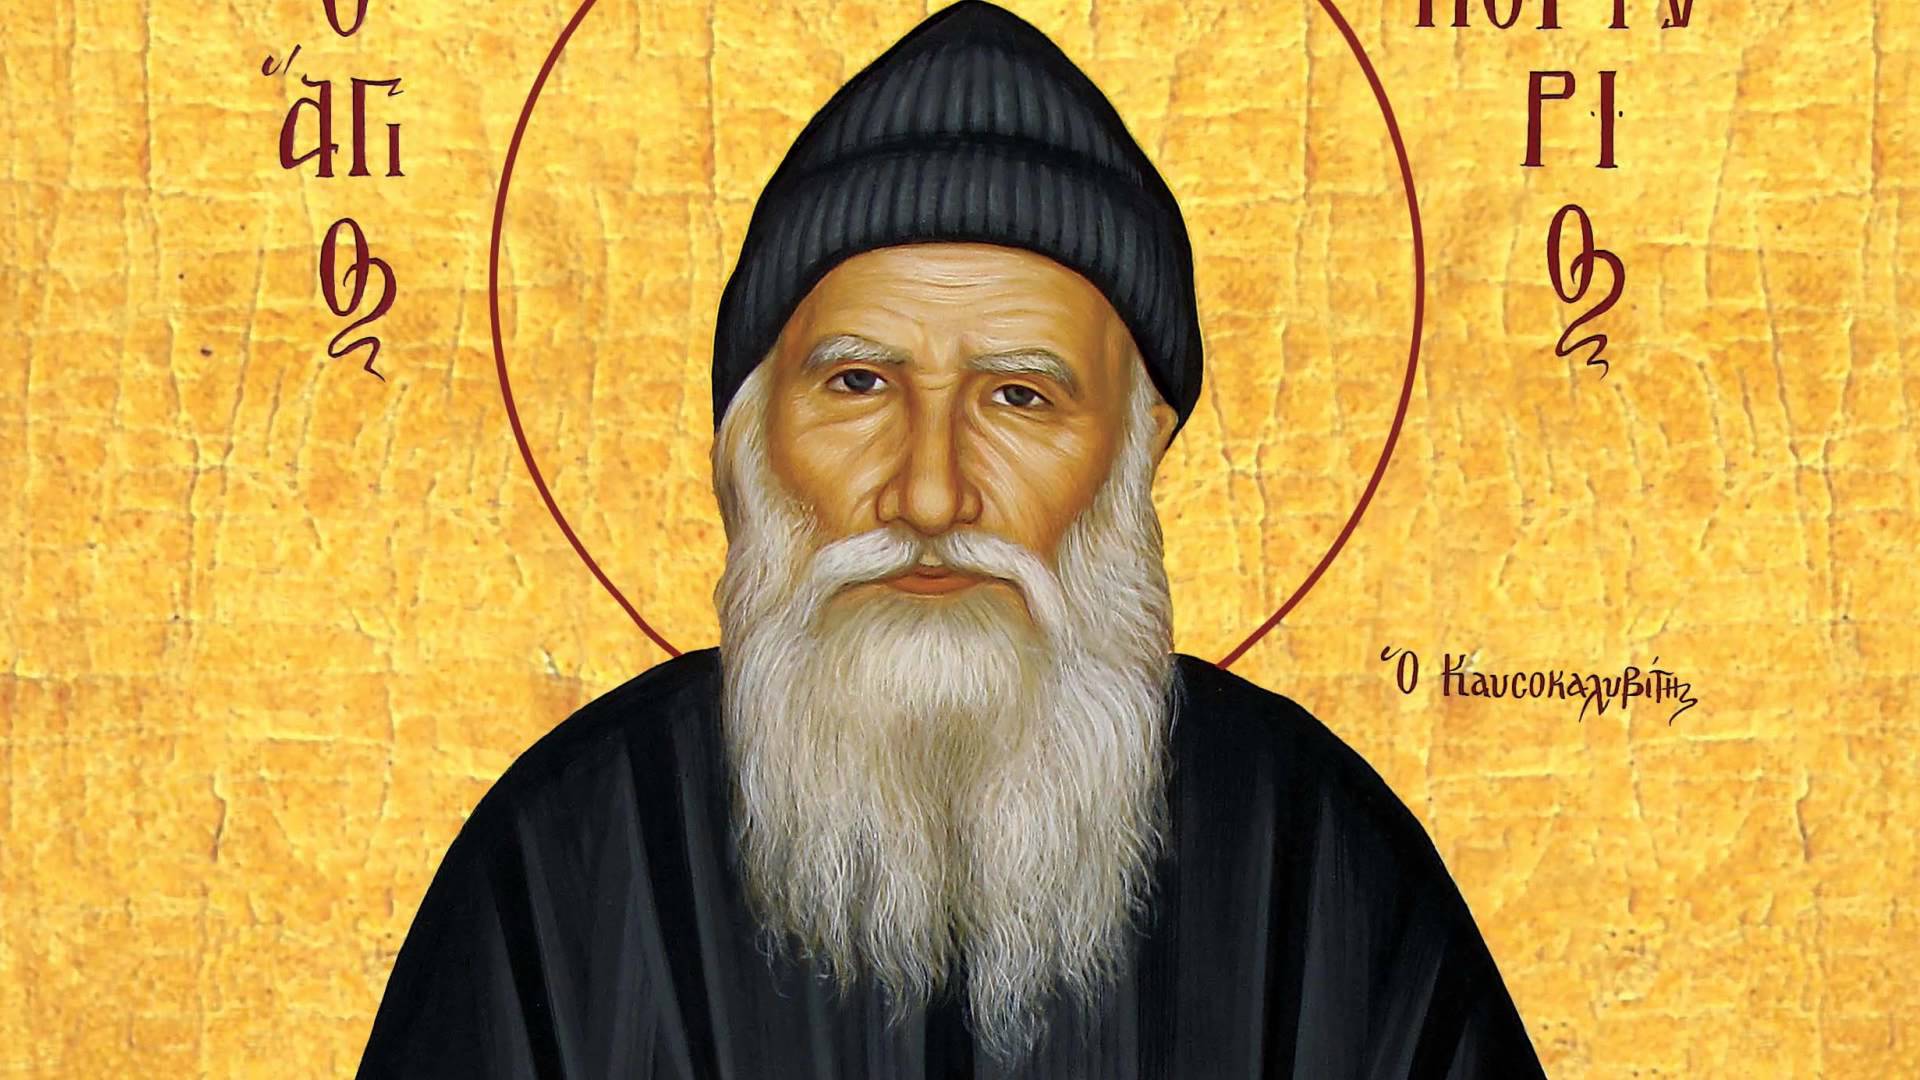 Saint Porphyrios the Causokalyvite the clairvoyant and miracle worker